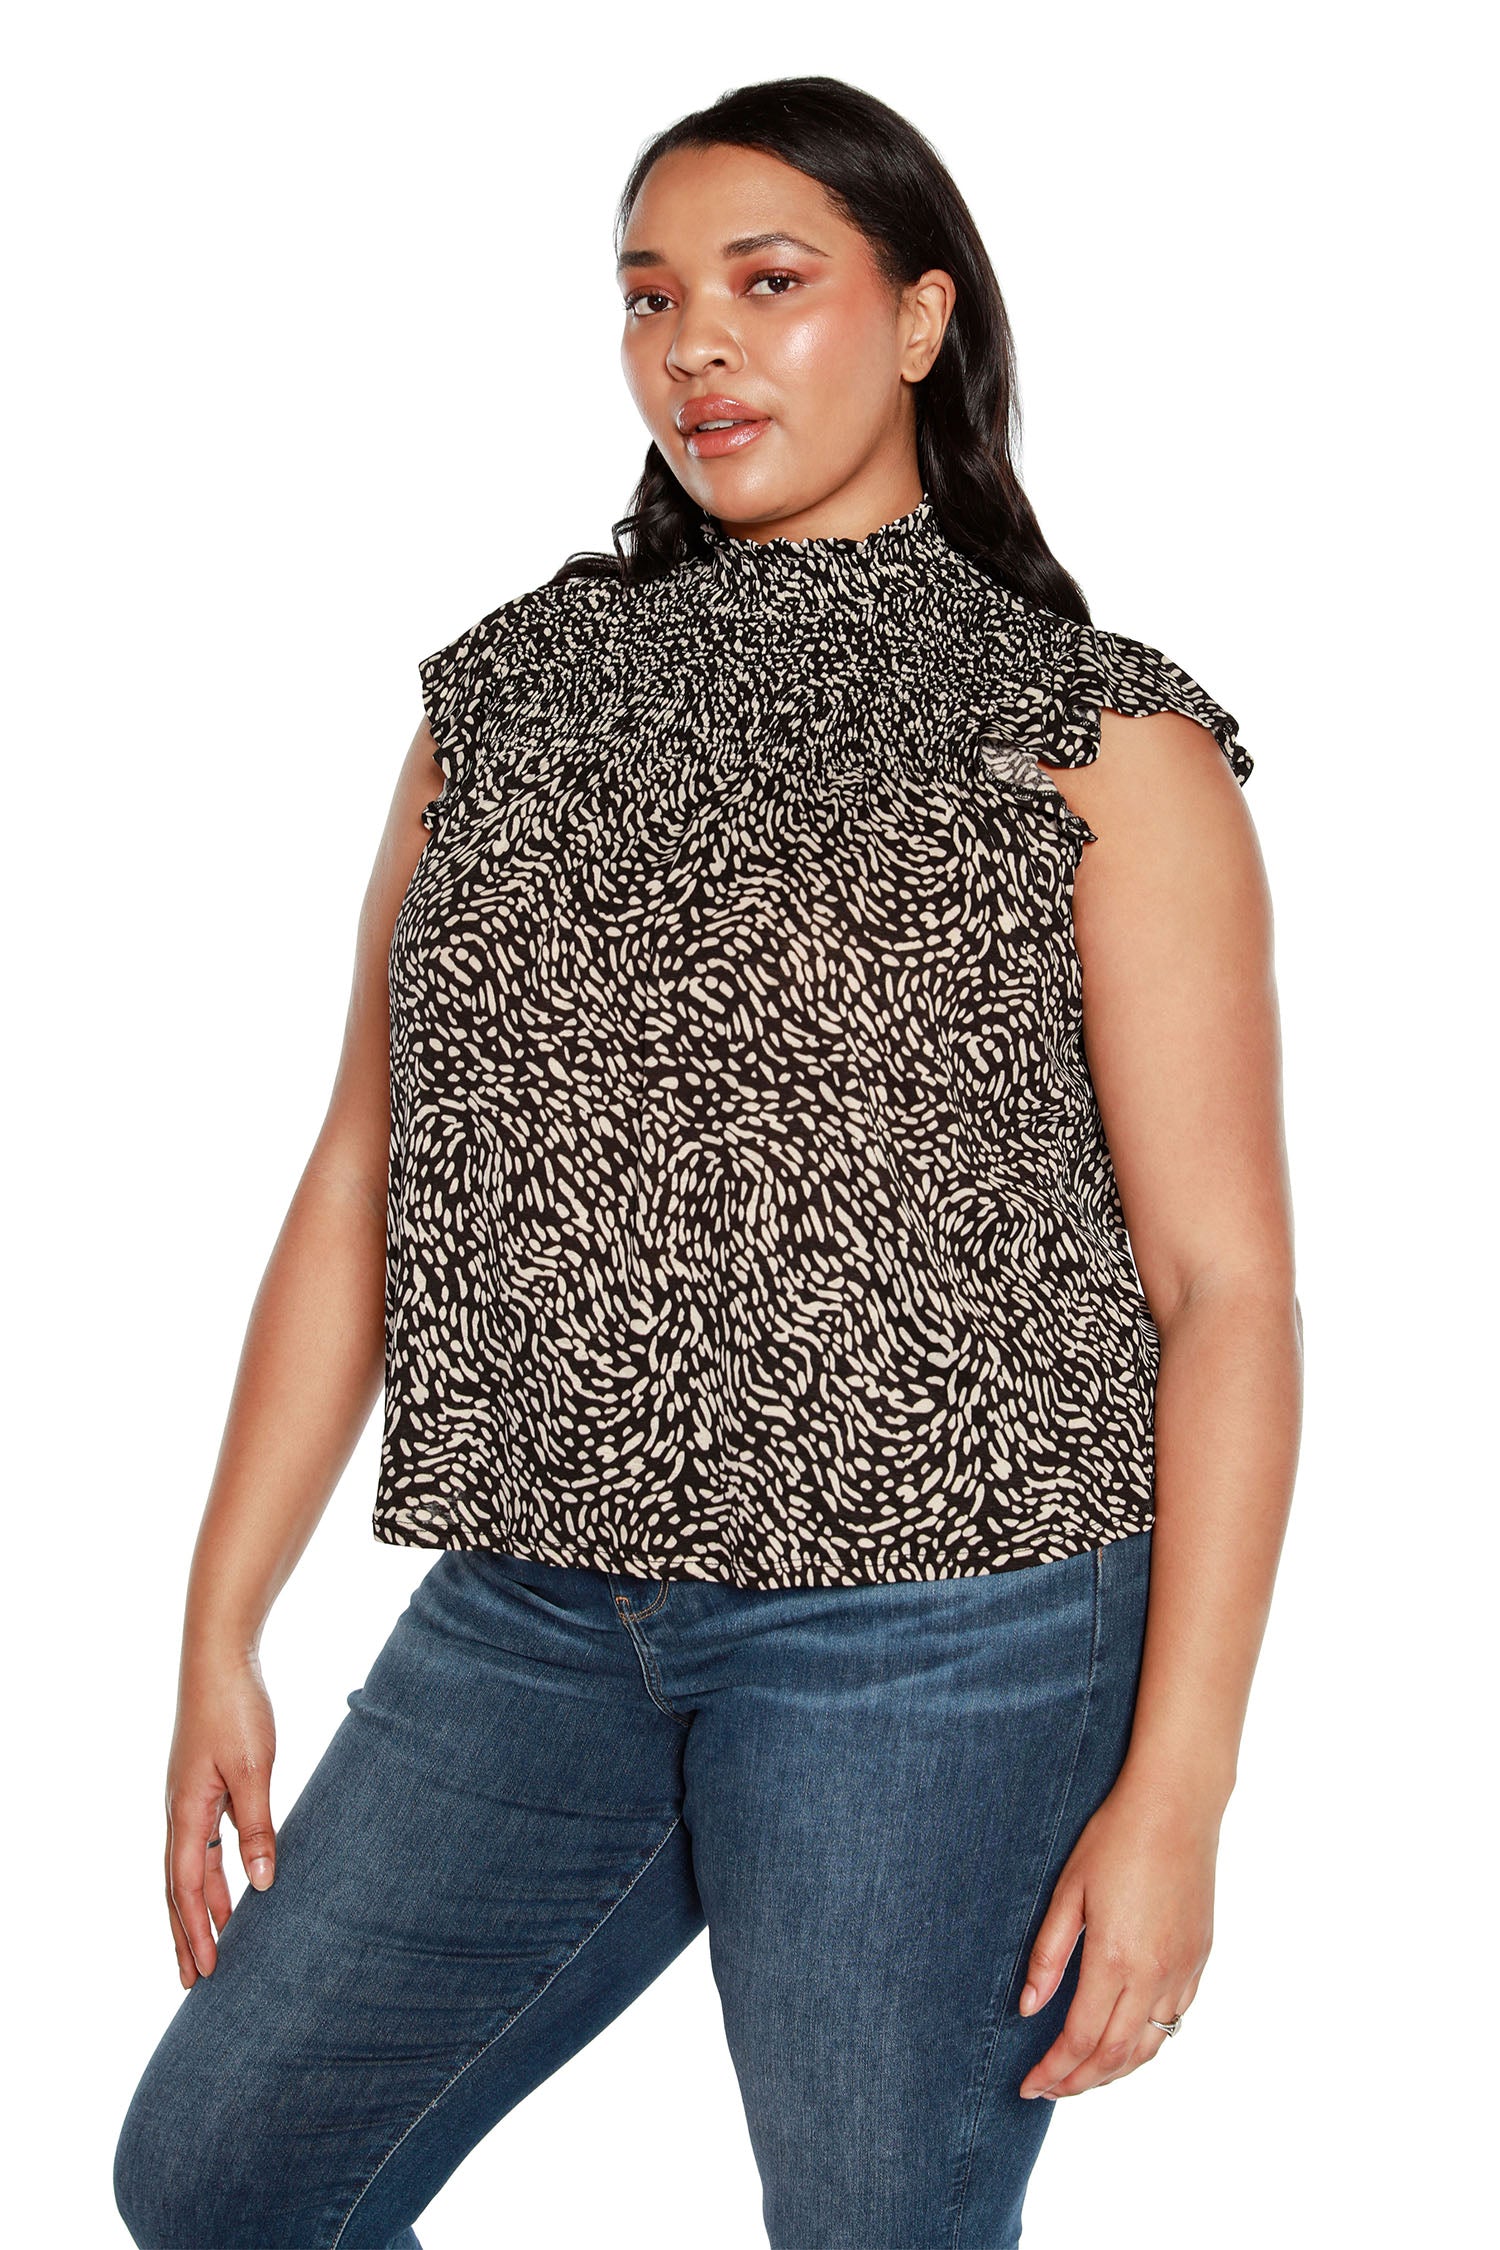 Women's Cap Sleeve Top in a Modern Print with Ruching Detail Below the Mock Neck | Curvy